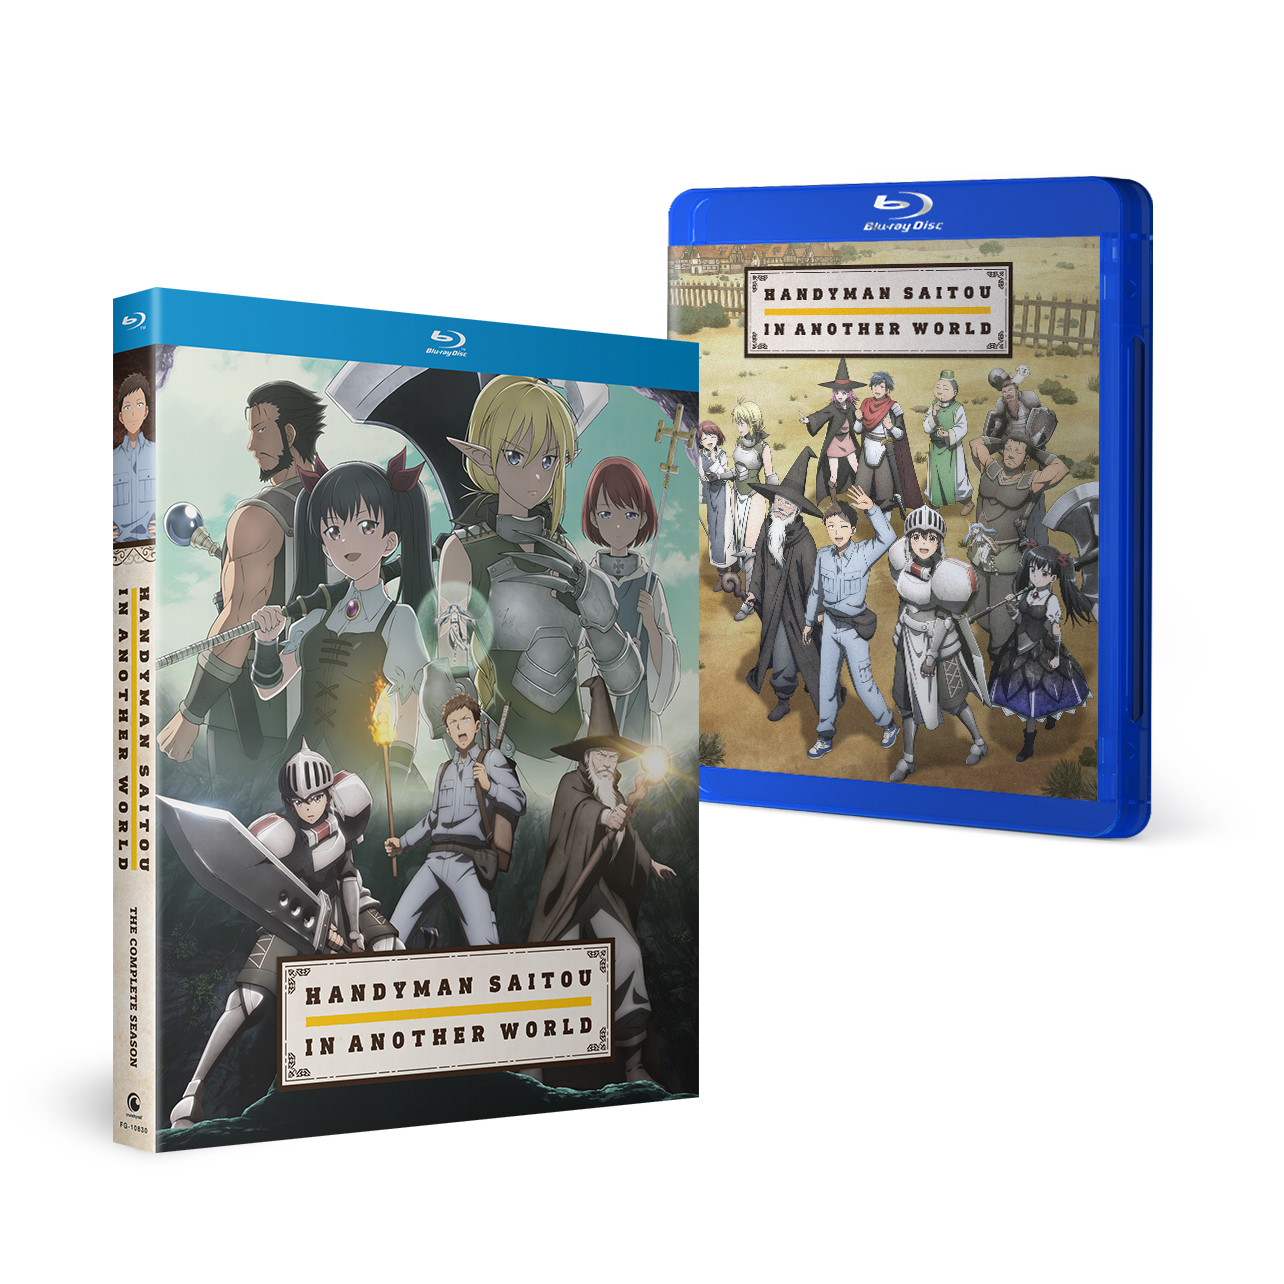 Handyman Saitou in Another World - The Complete Season - Blu-ray image count 0